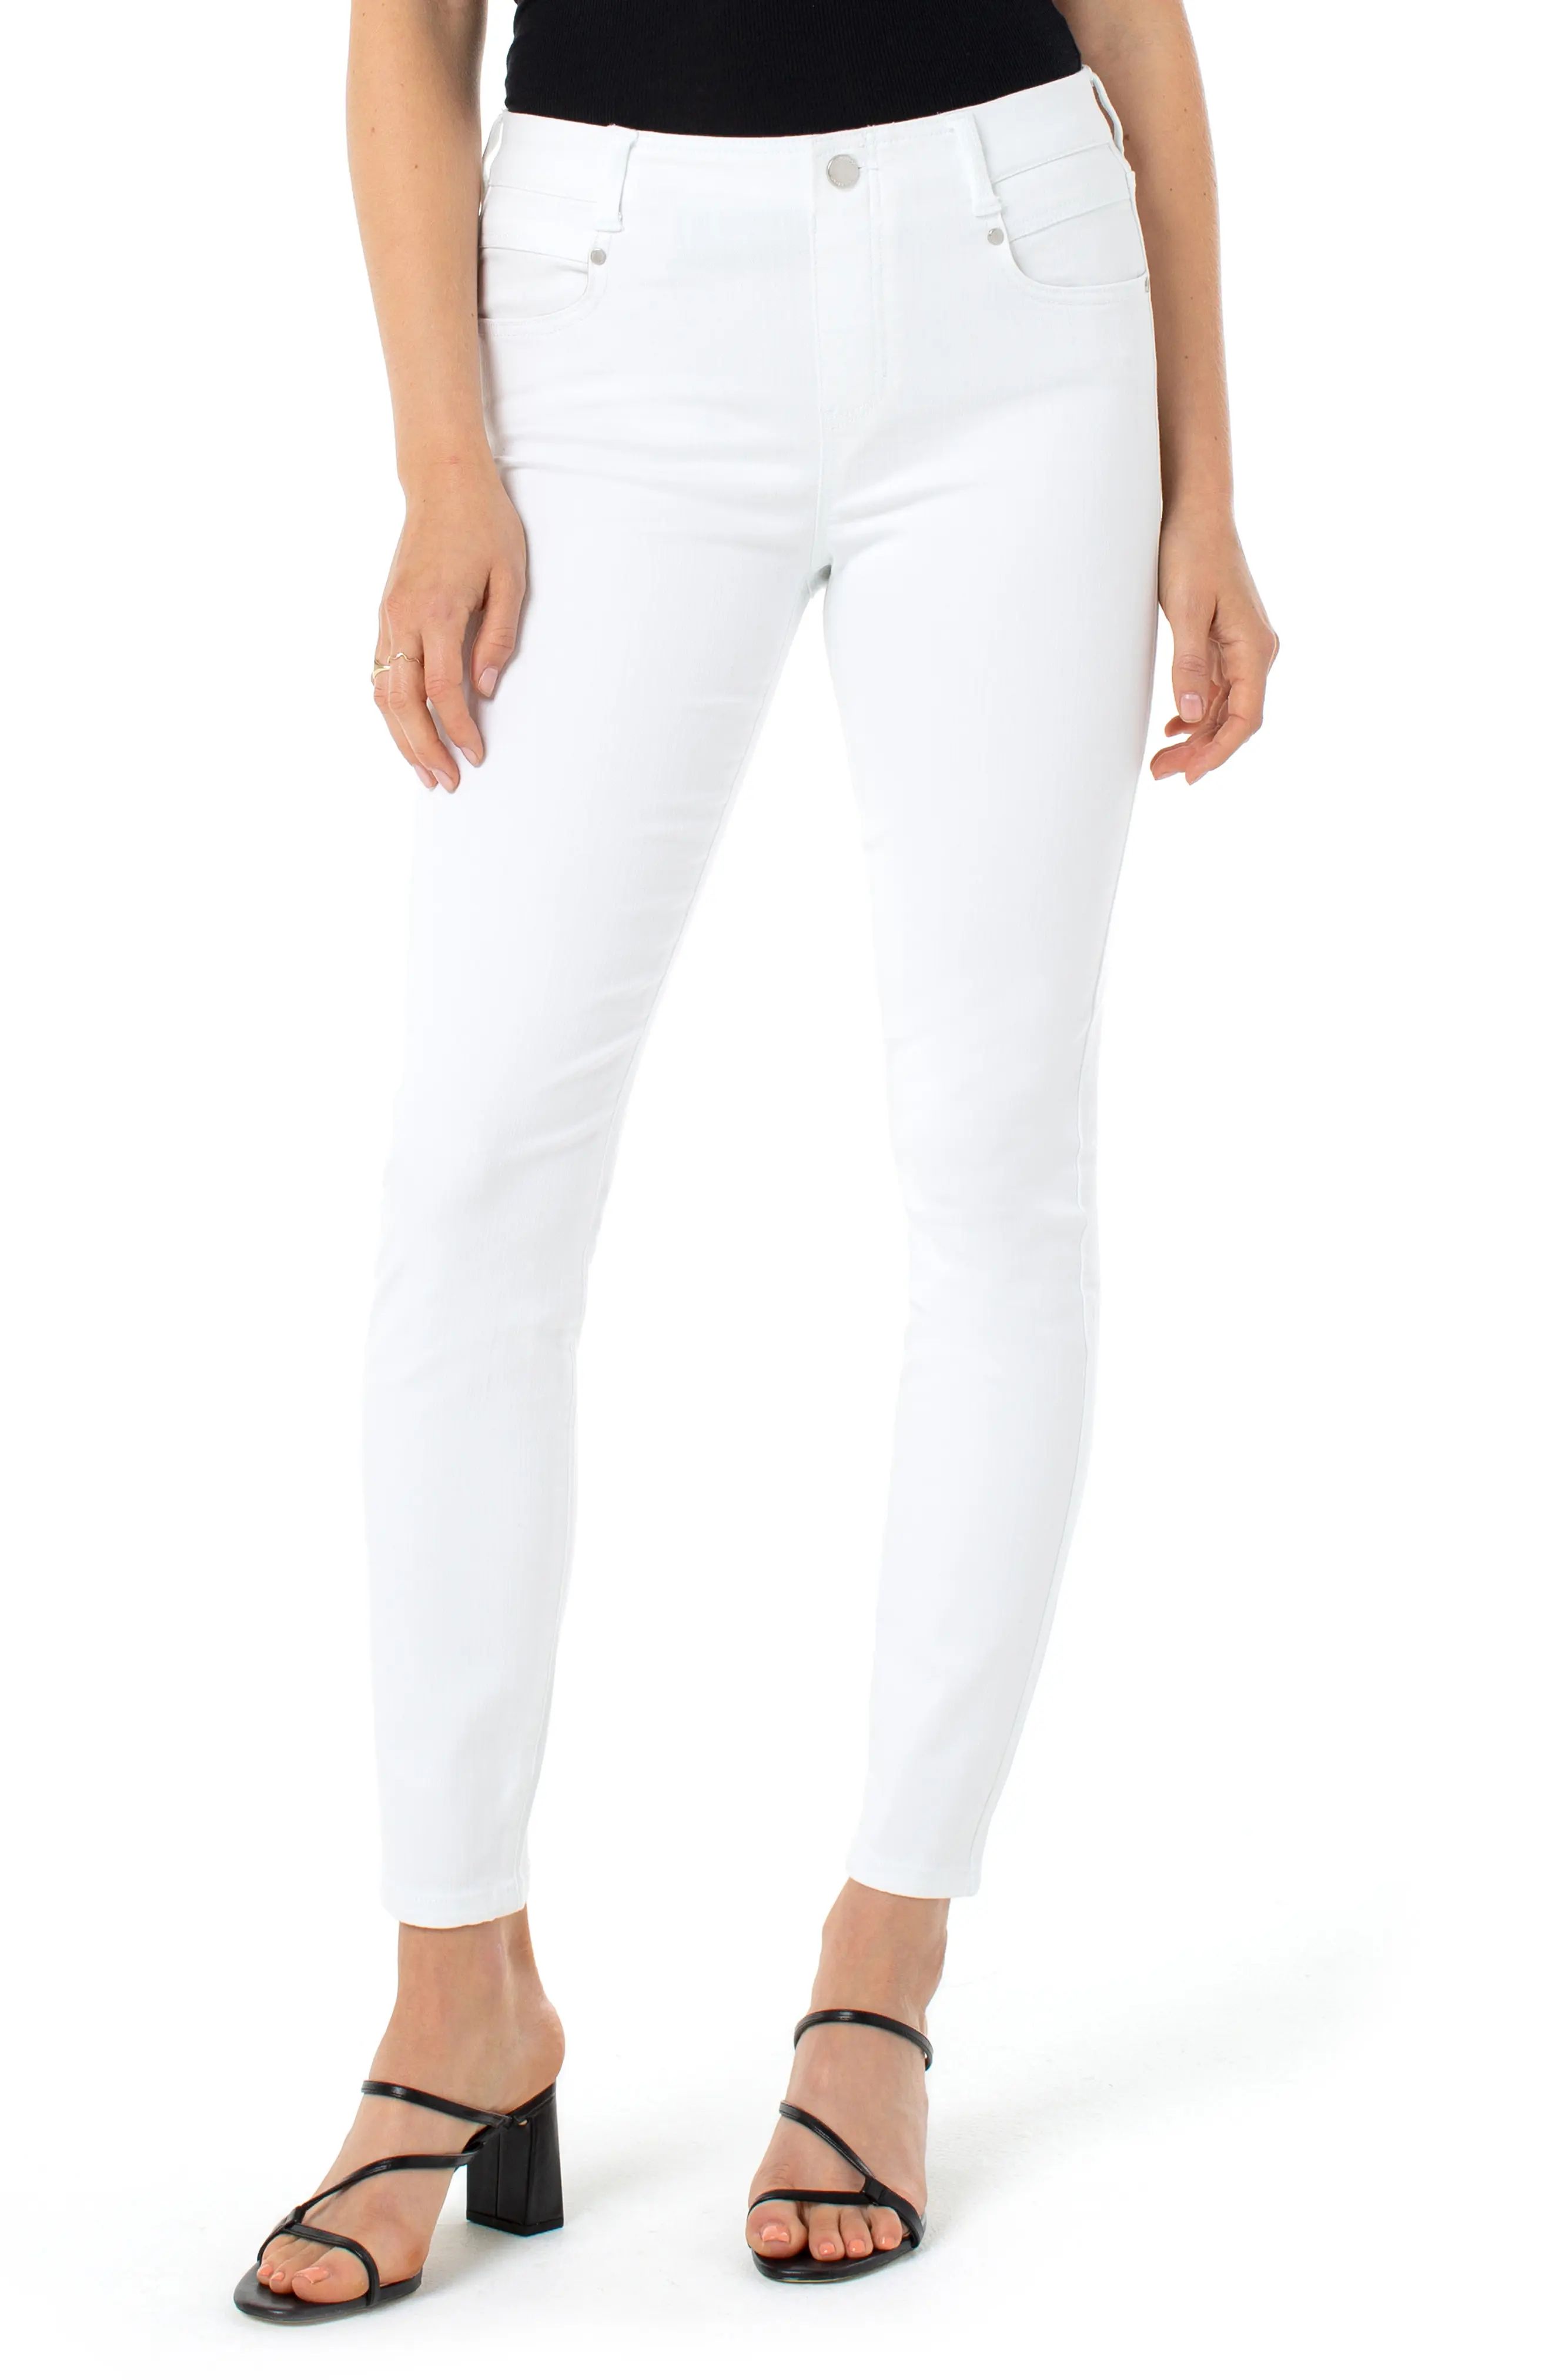 Women's Liverpool Gia Glider High Waist Ankle Skinny Jeans, Size 12 - White | Nordstrom